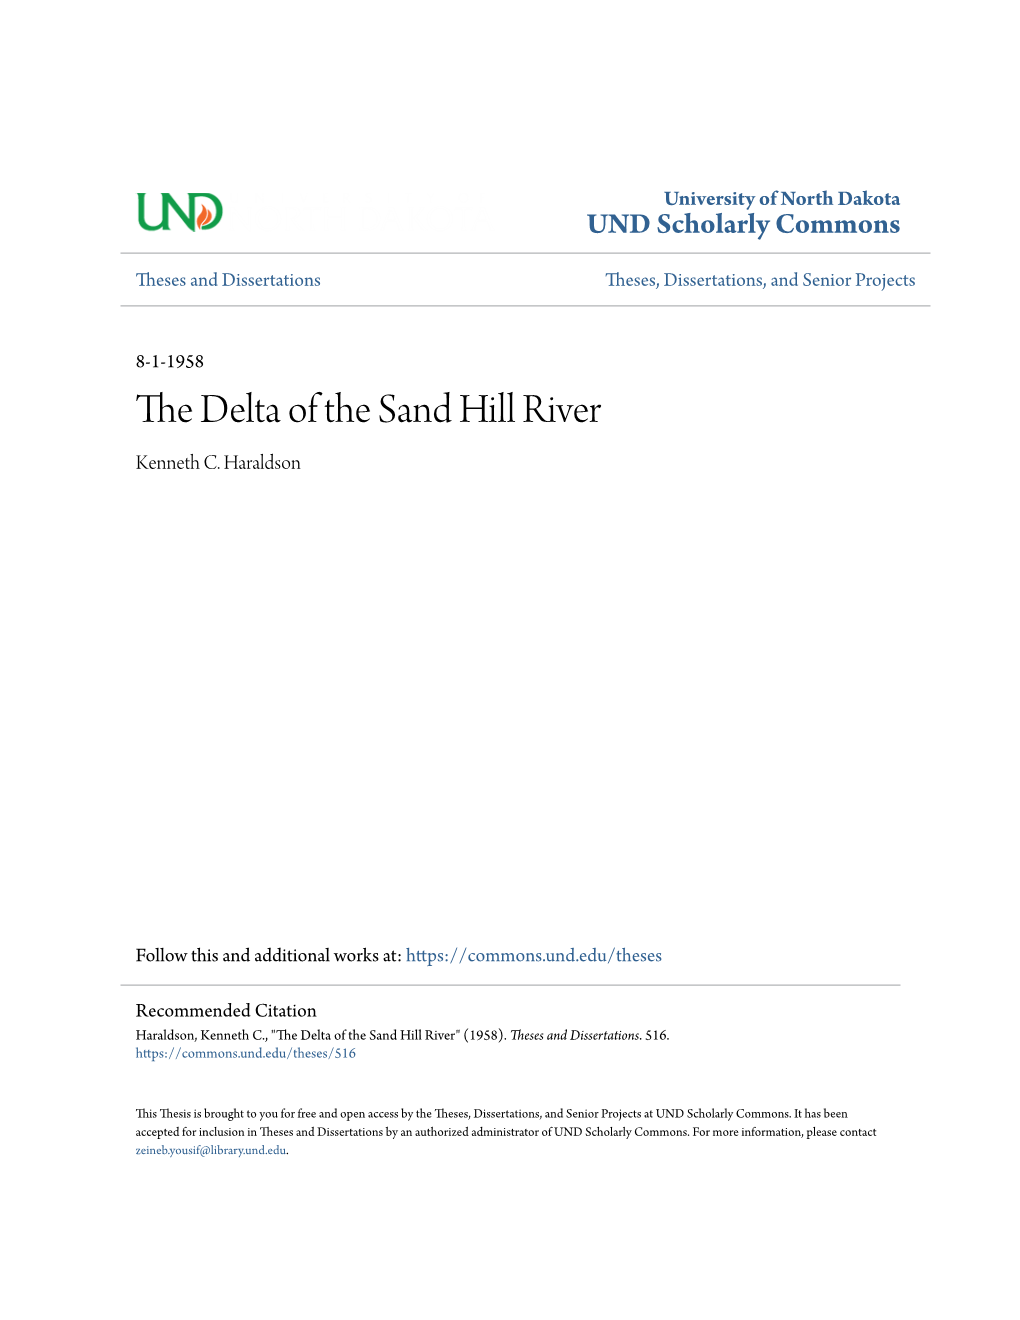 The Delta of the Sand Hill River